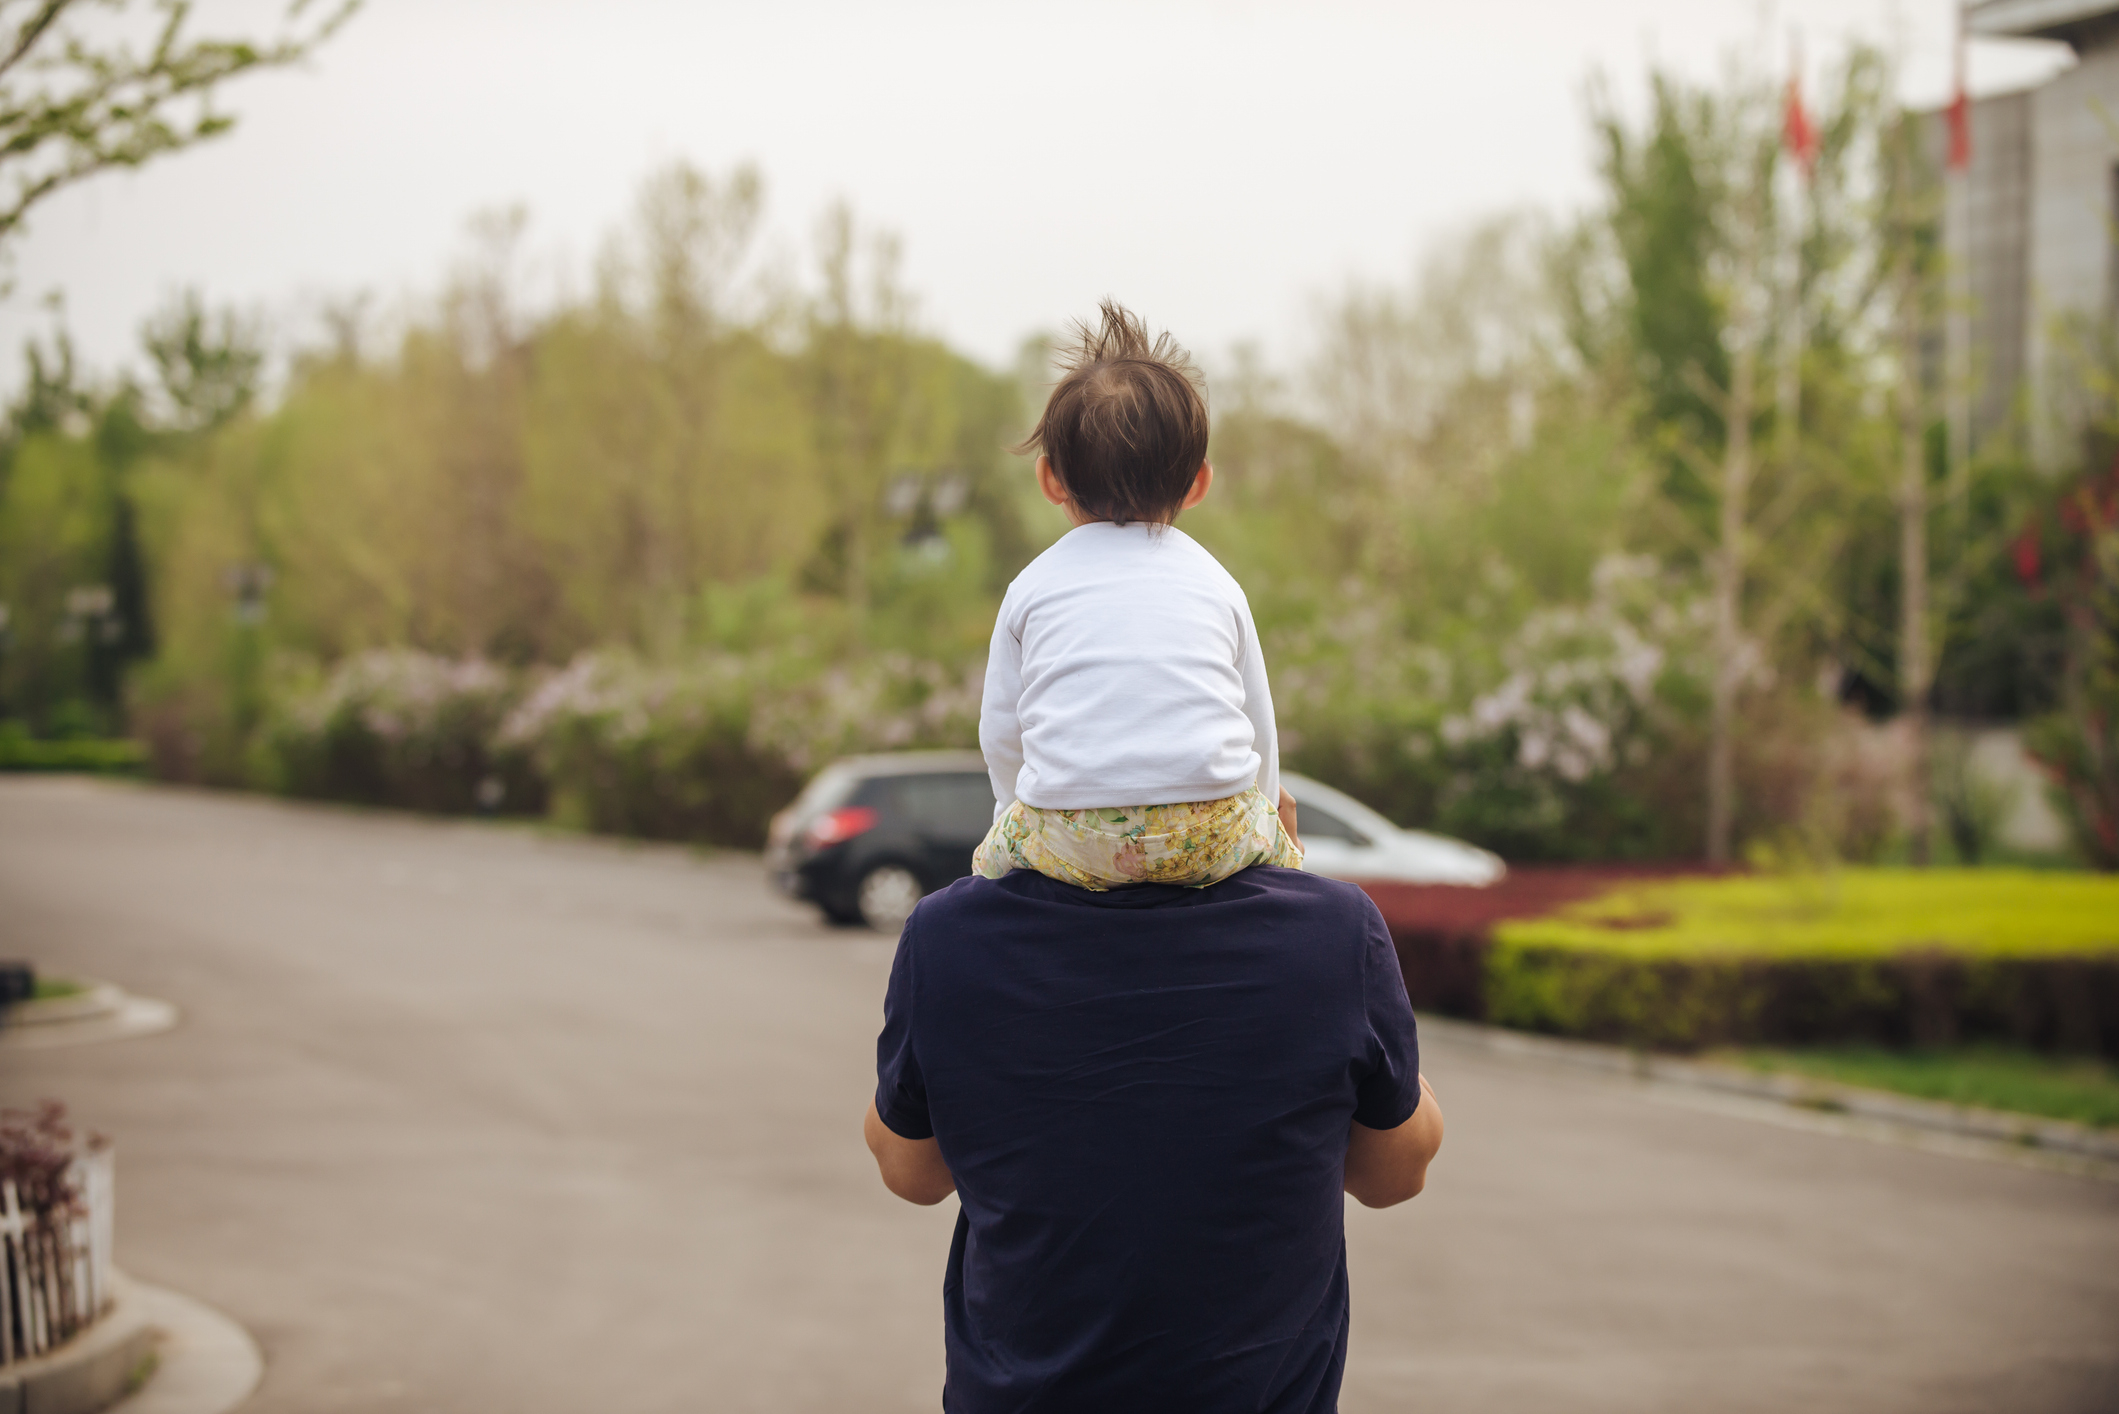 A person carries a small child on their shoulders while walking down a quiet, tree-lined street. Both are facing away from the camera